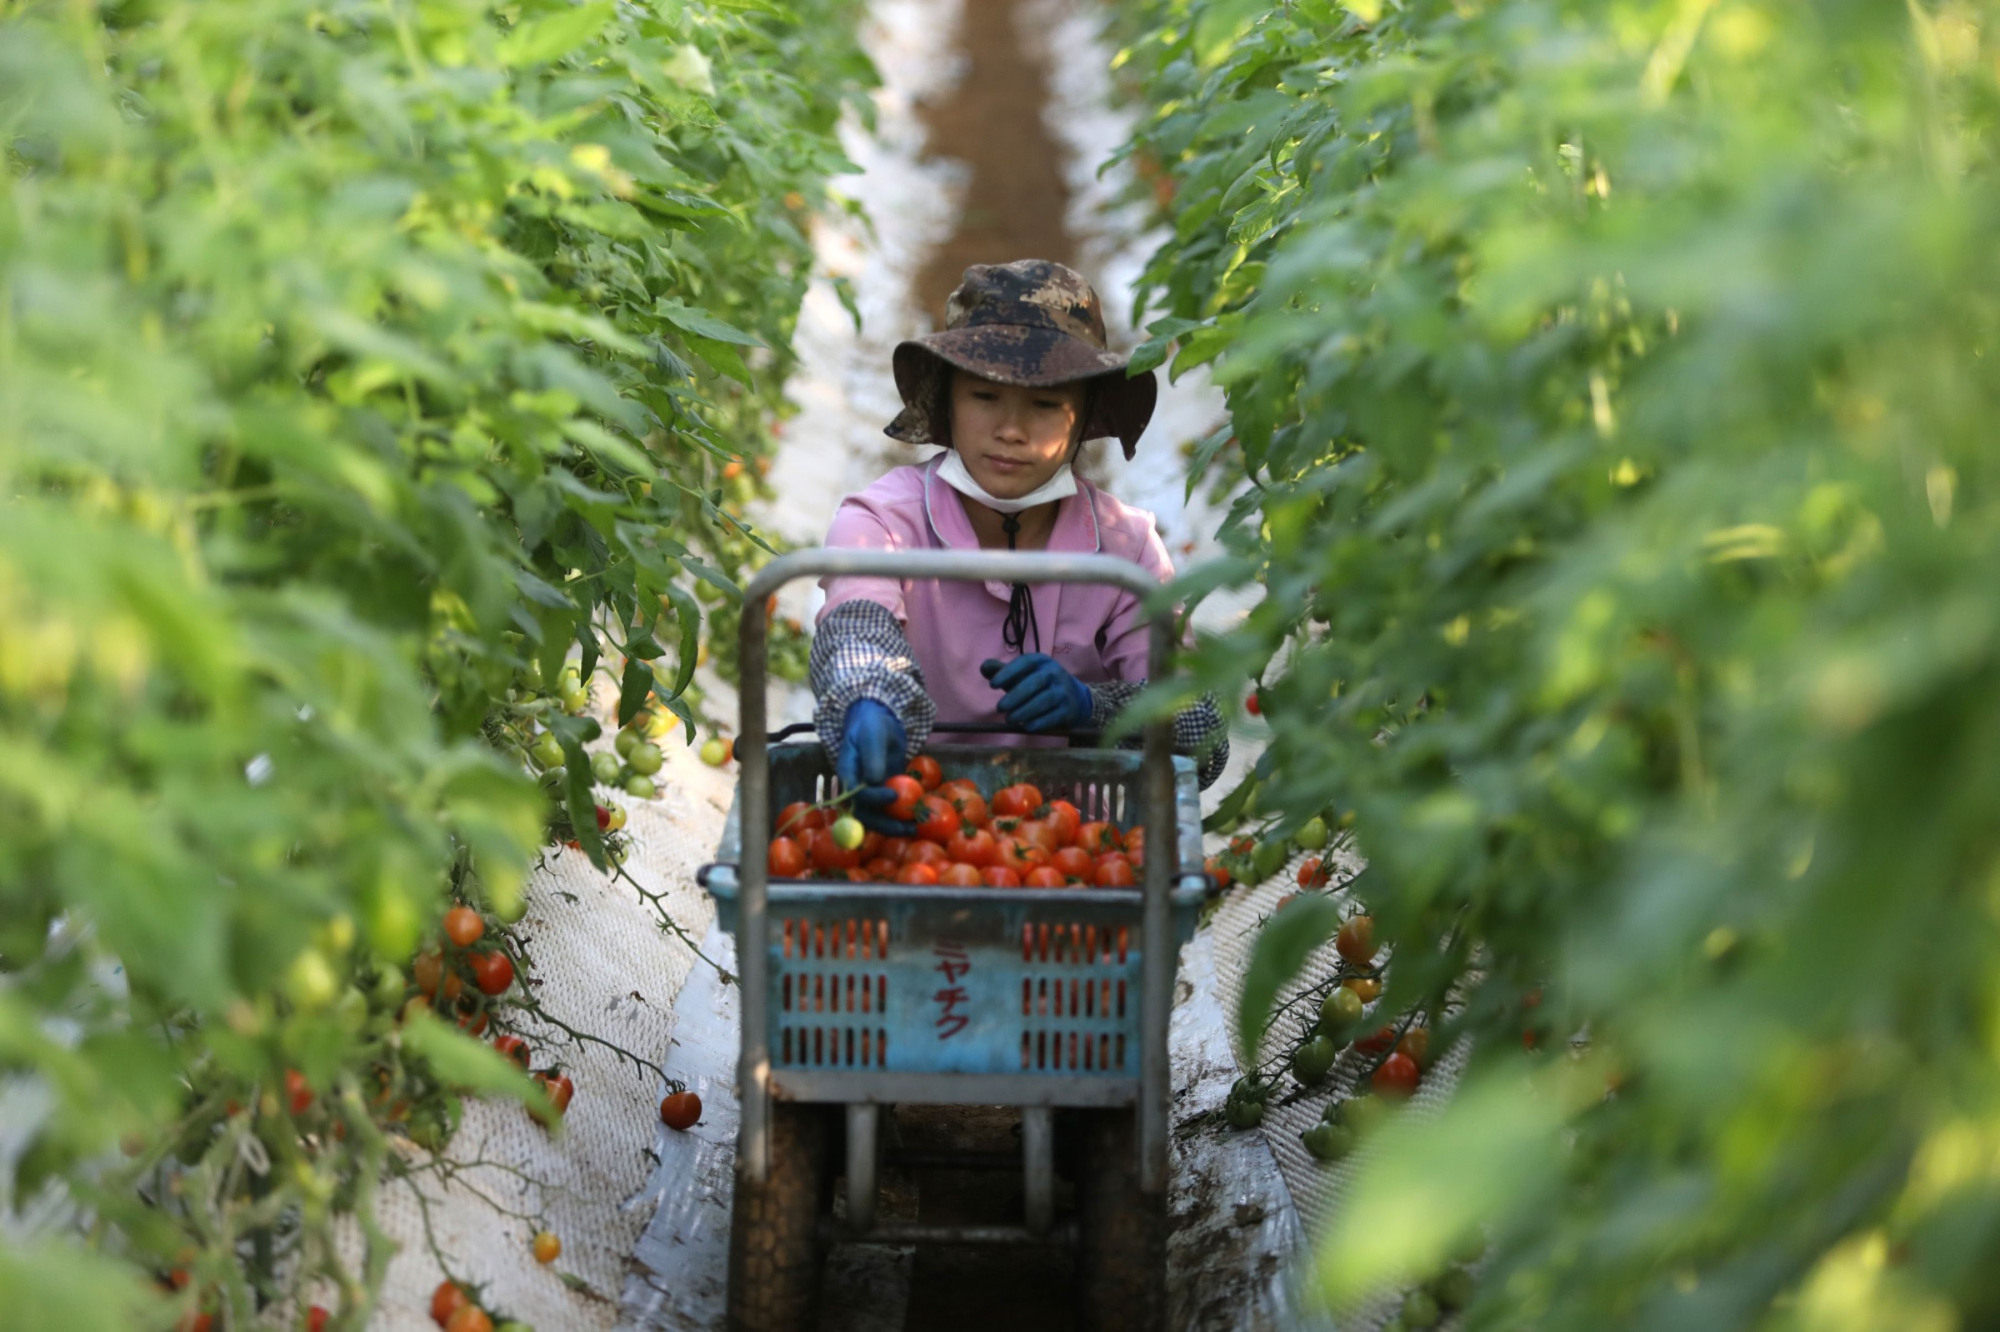 A Vietnamese worker picks tomatoes at a farm in Asahi, Chiba Prefecture, last December. | BLOOMBERG